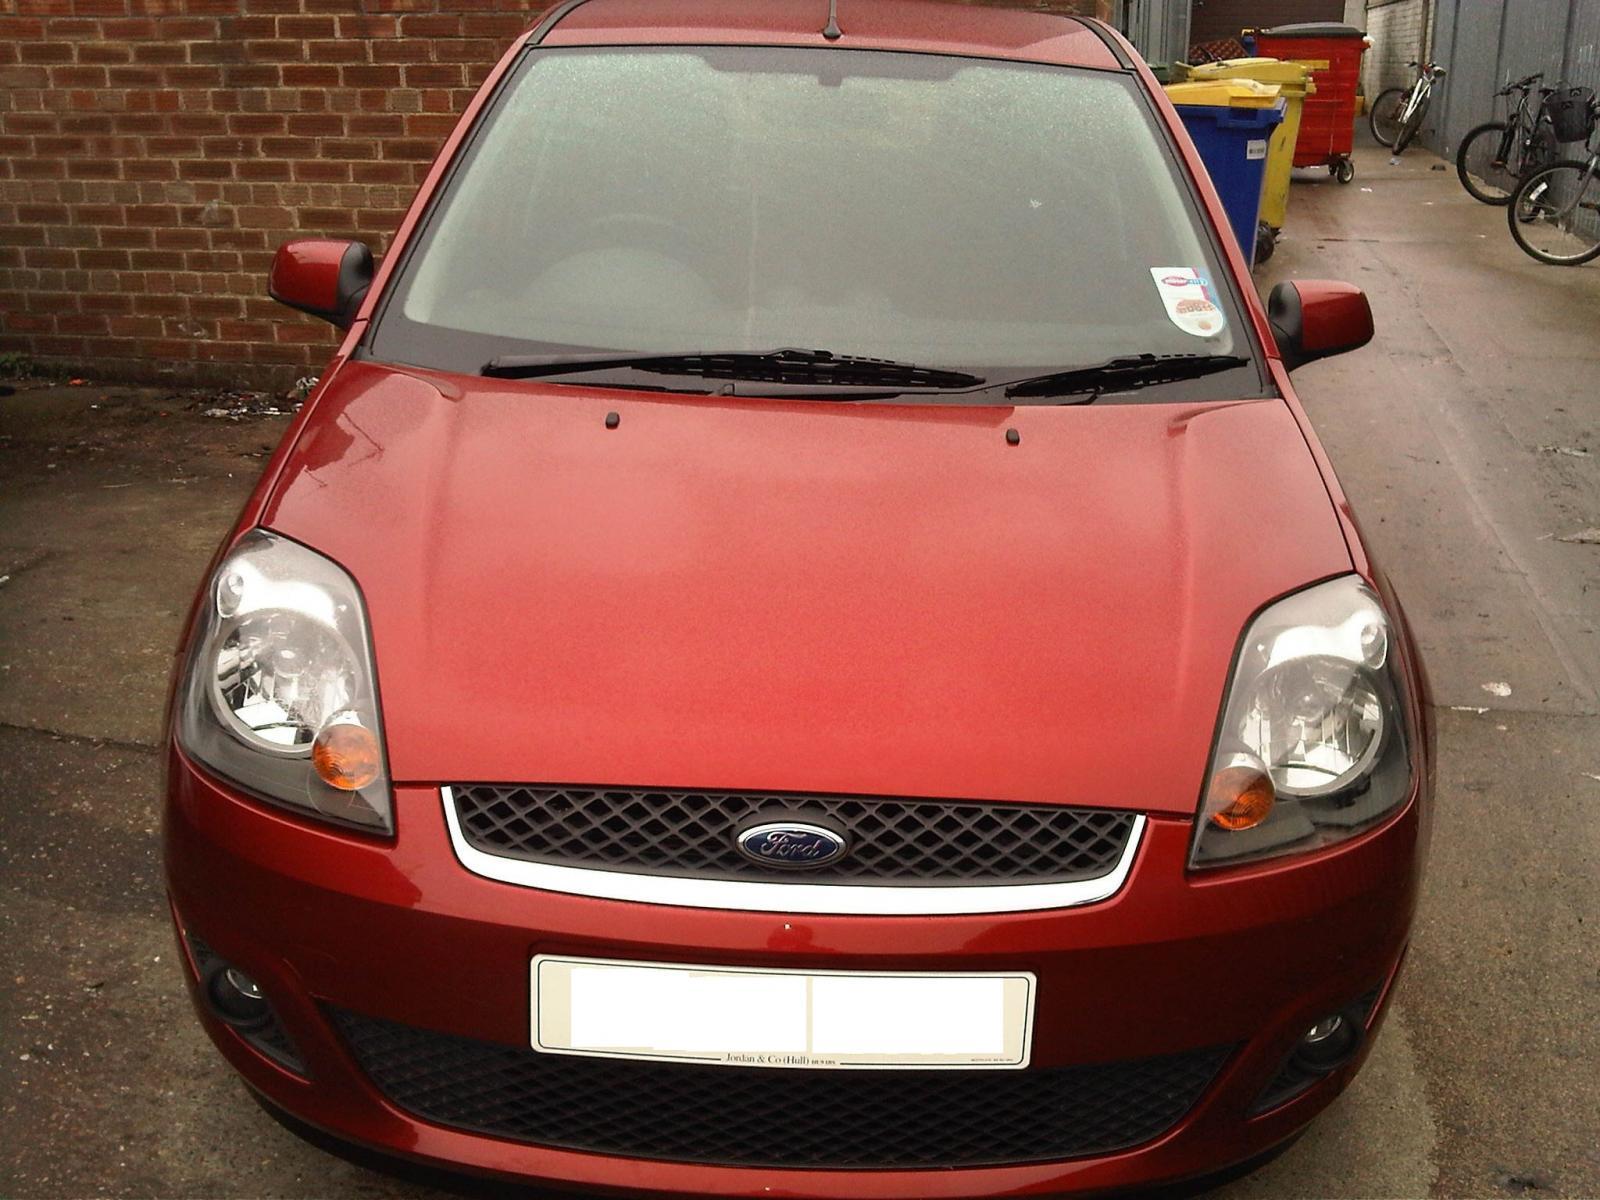 Suchy's Ford Fiesta 1.4 Zetec Climate